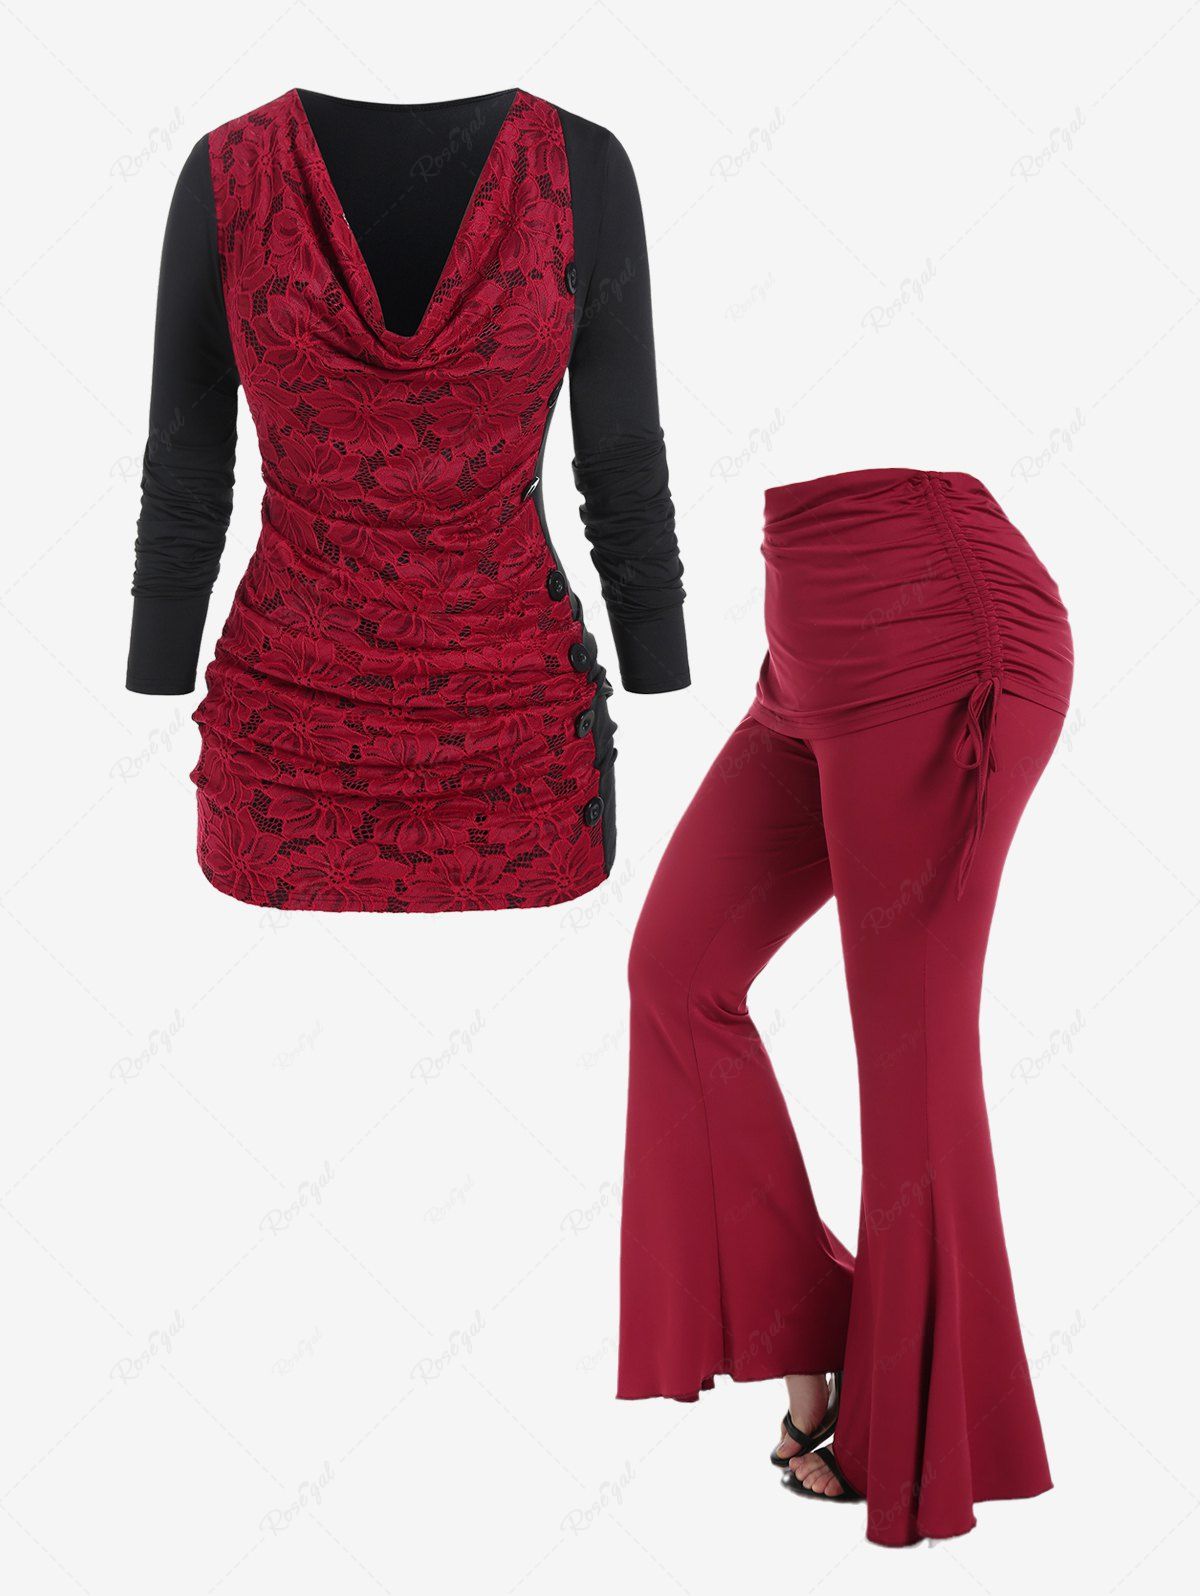 Best Cowl Neck Contrast Lace Ruched Tee and Cinched Foldover Bell Bottom Pants Plus Size Outfit  